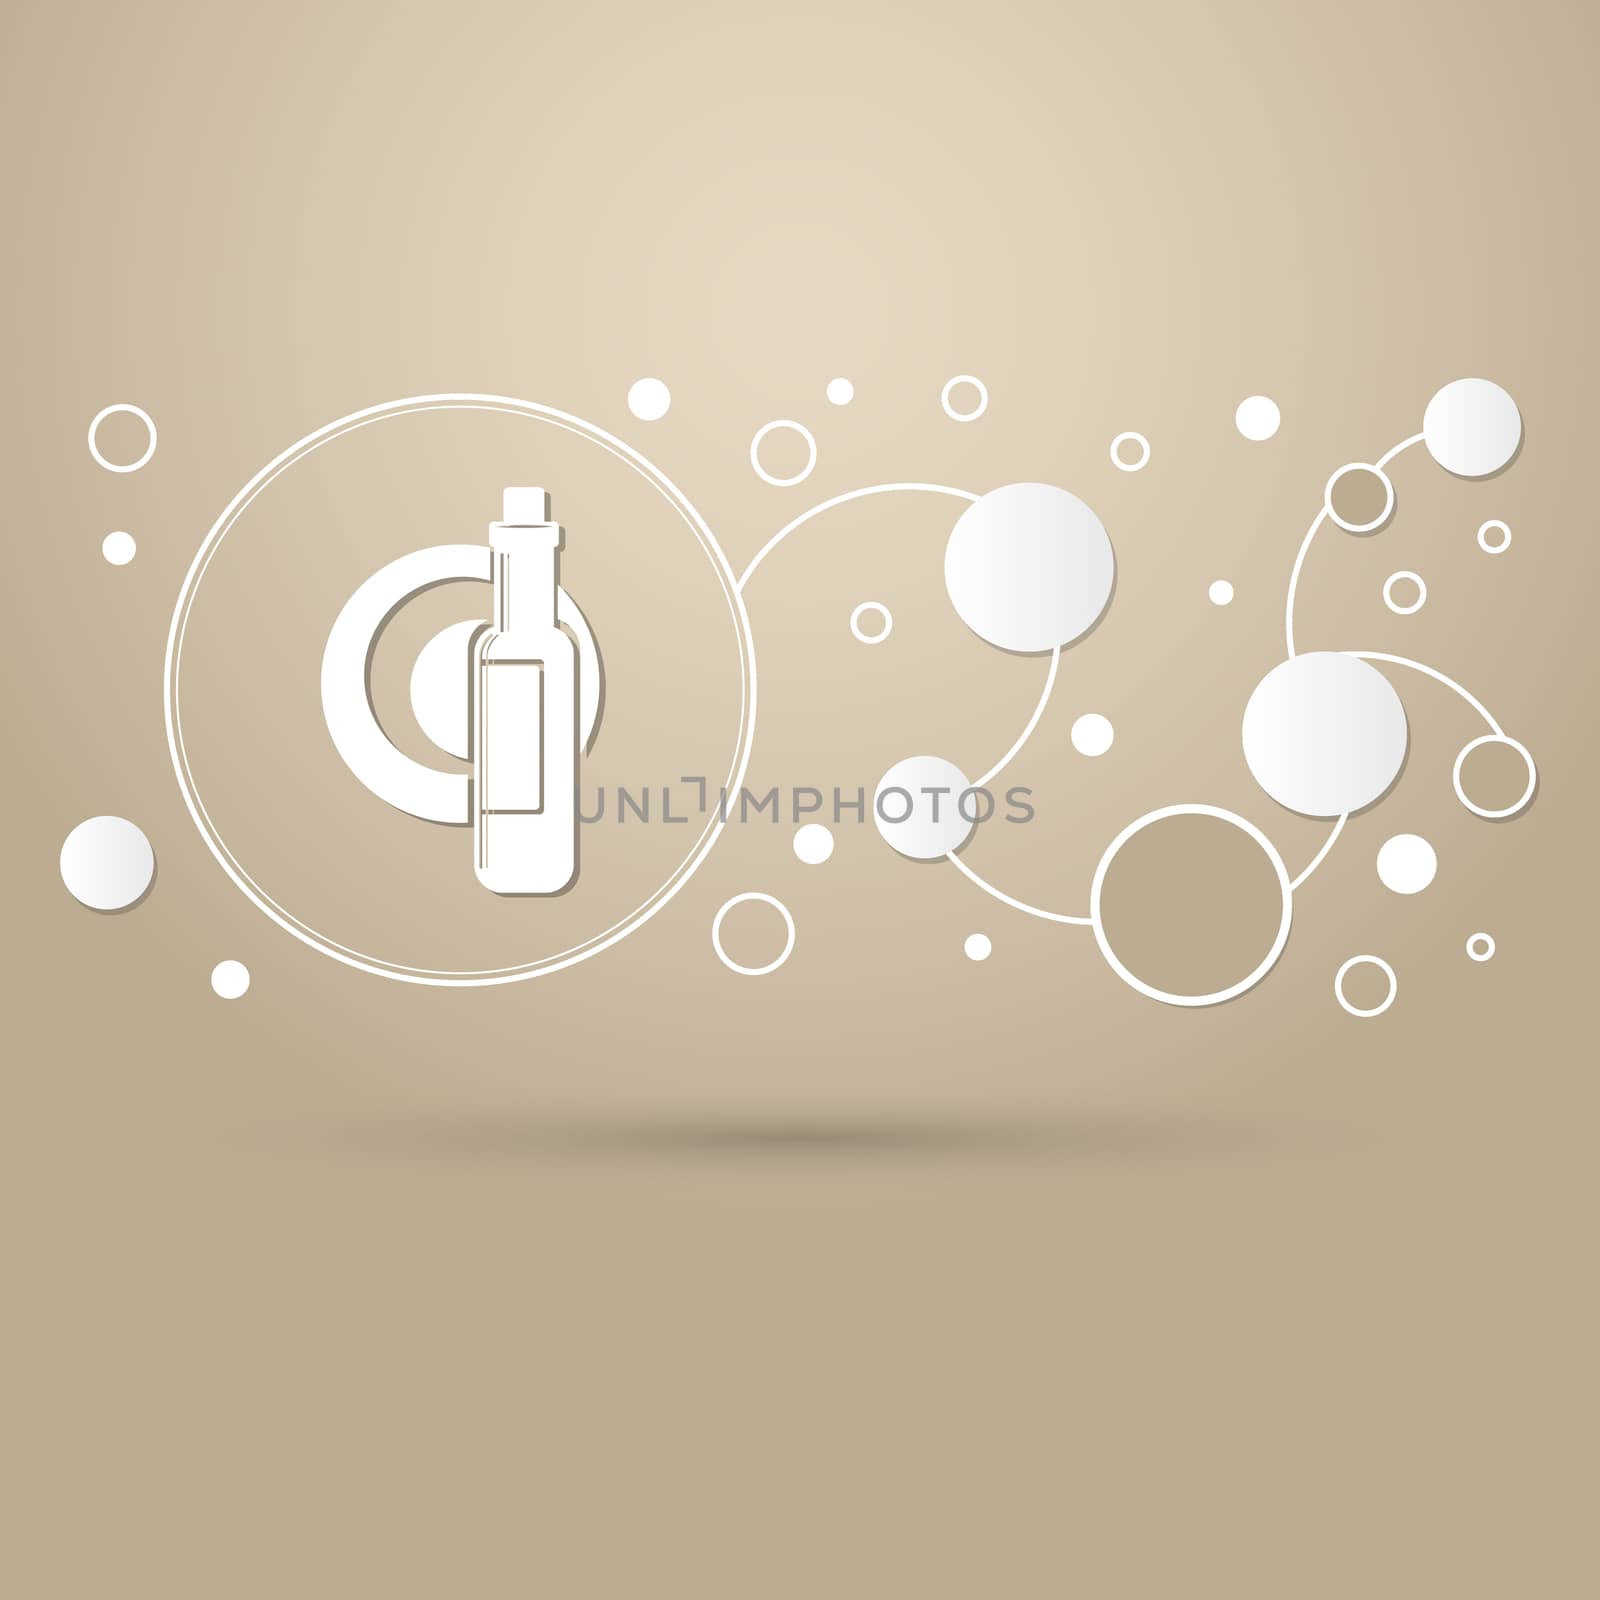 Beer, wine bottle on a brown background with elegant style and modern design infographic.  by Adamchuk